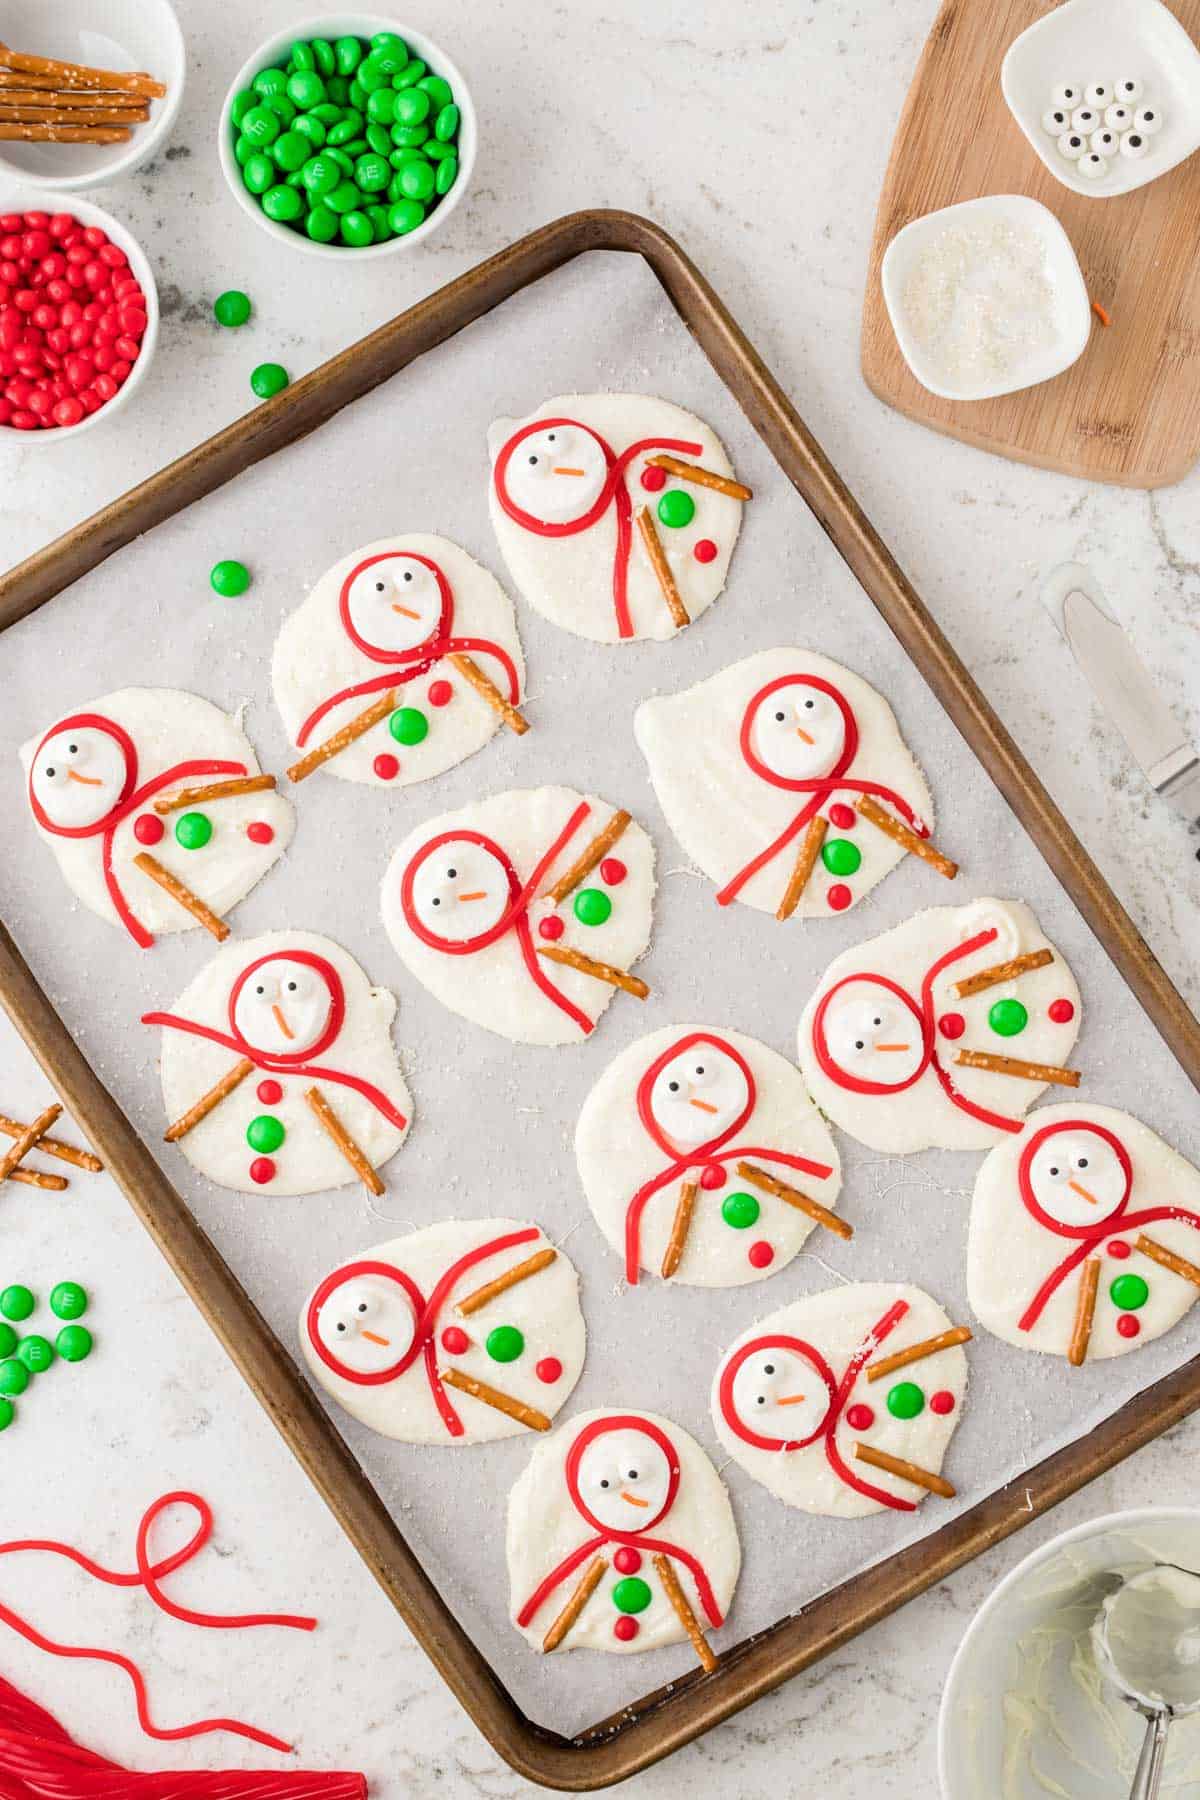 dollops of melted white chocolate arranged in grid on parchment paper to look like snowmen